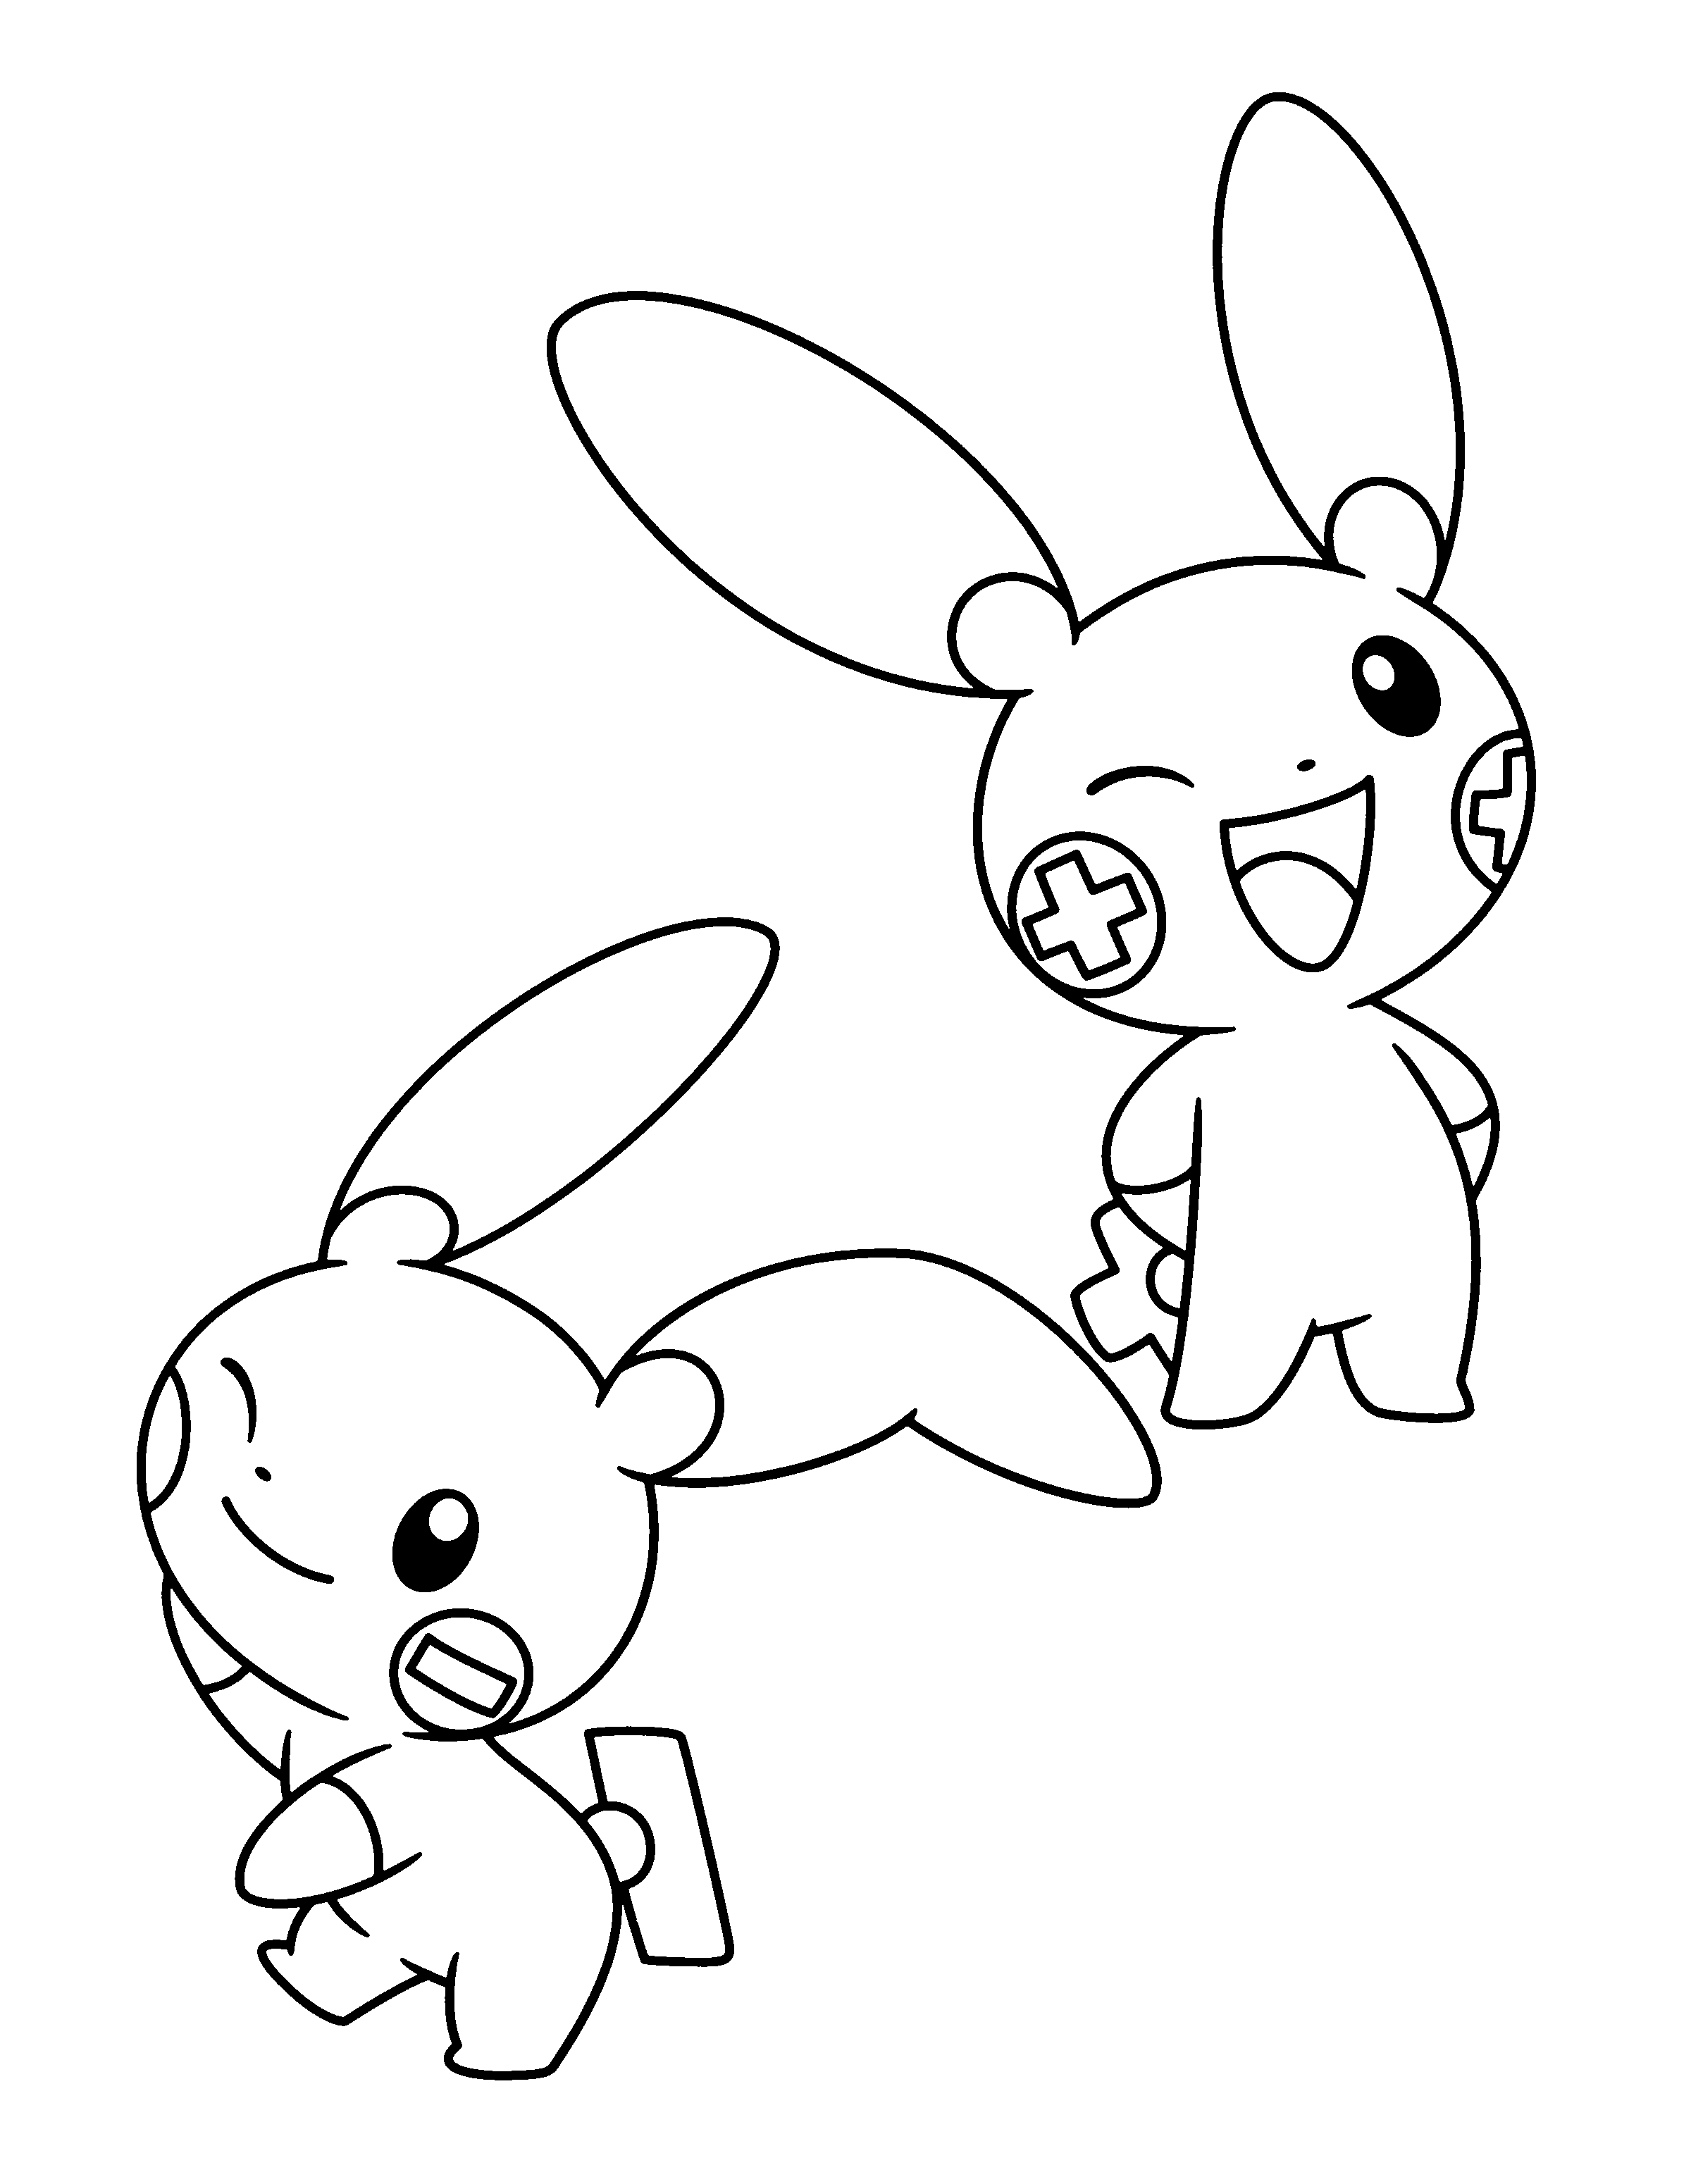 animated-coloring-pages-pokemon-image-0929